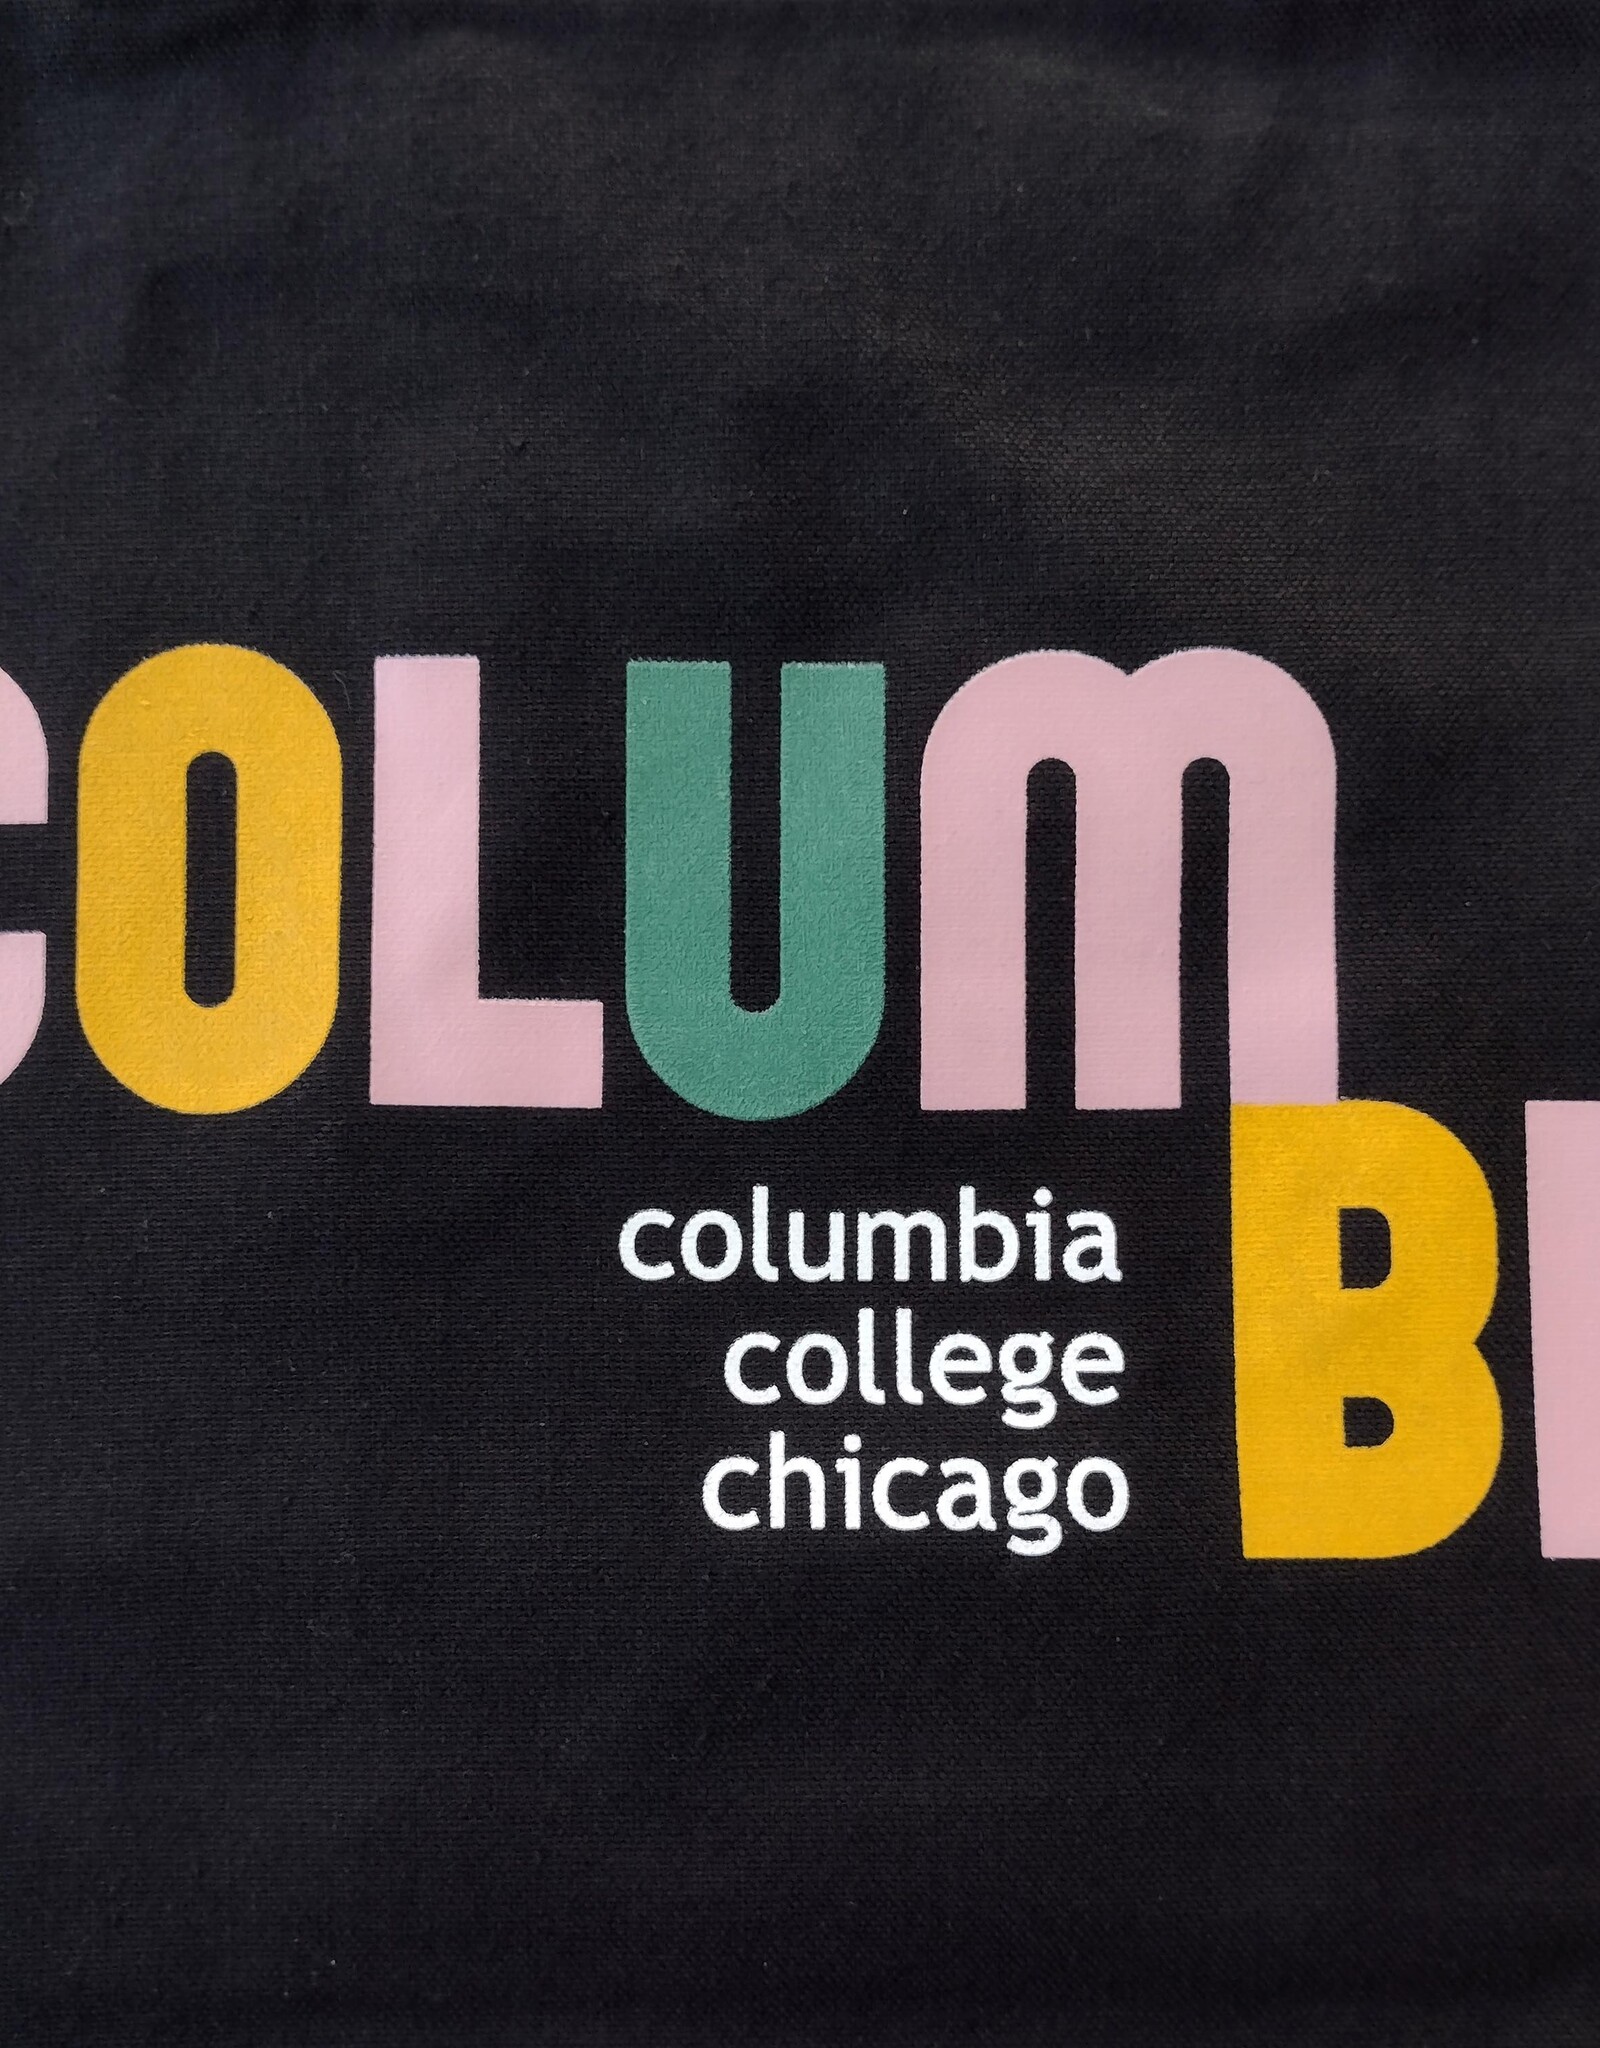 Buy Columbia, By Columbia Columbia College Chicago Black Canvas Tote